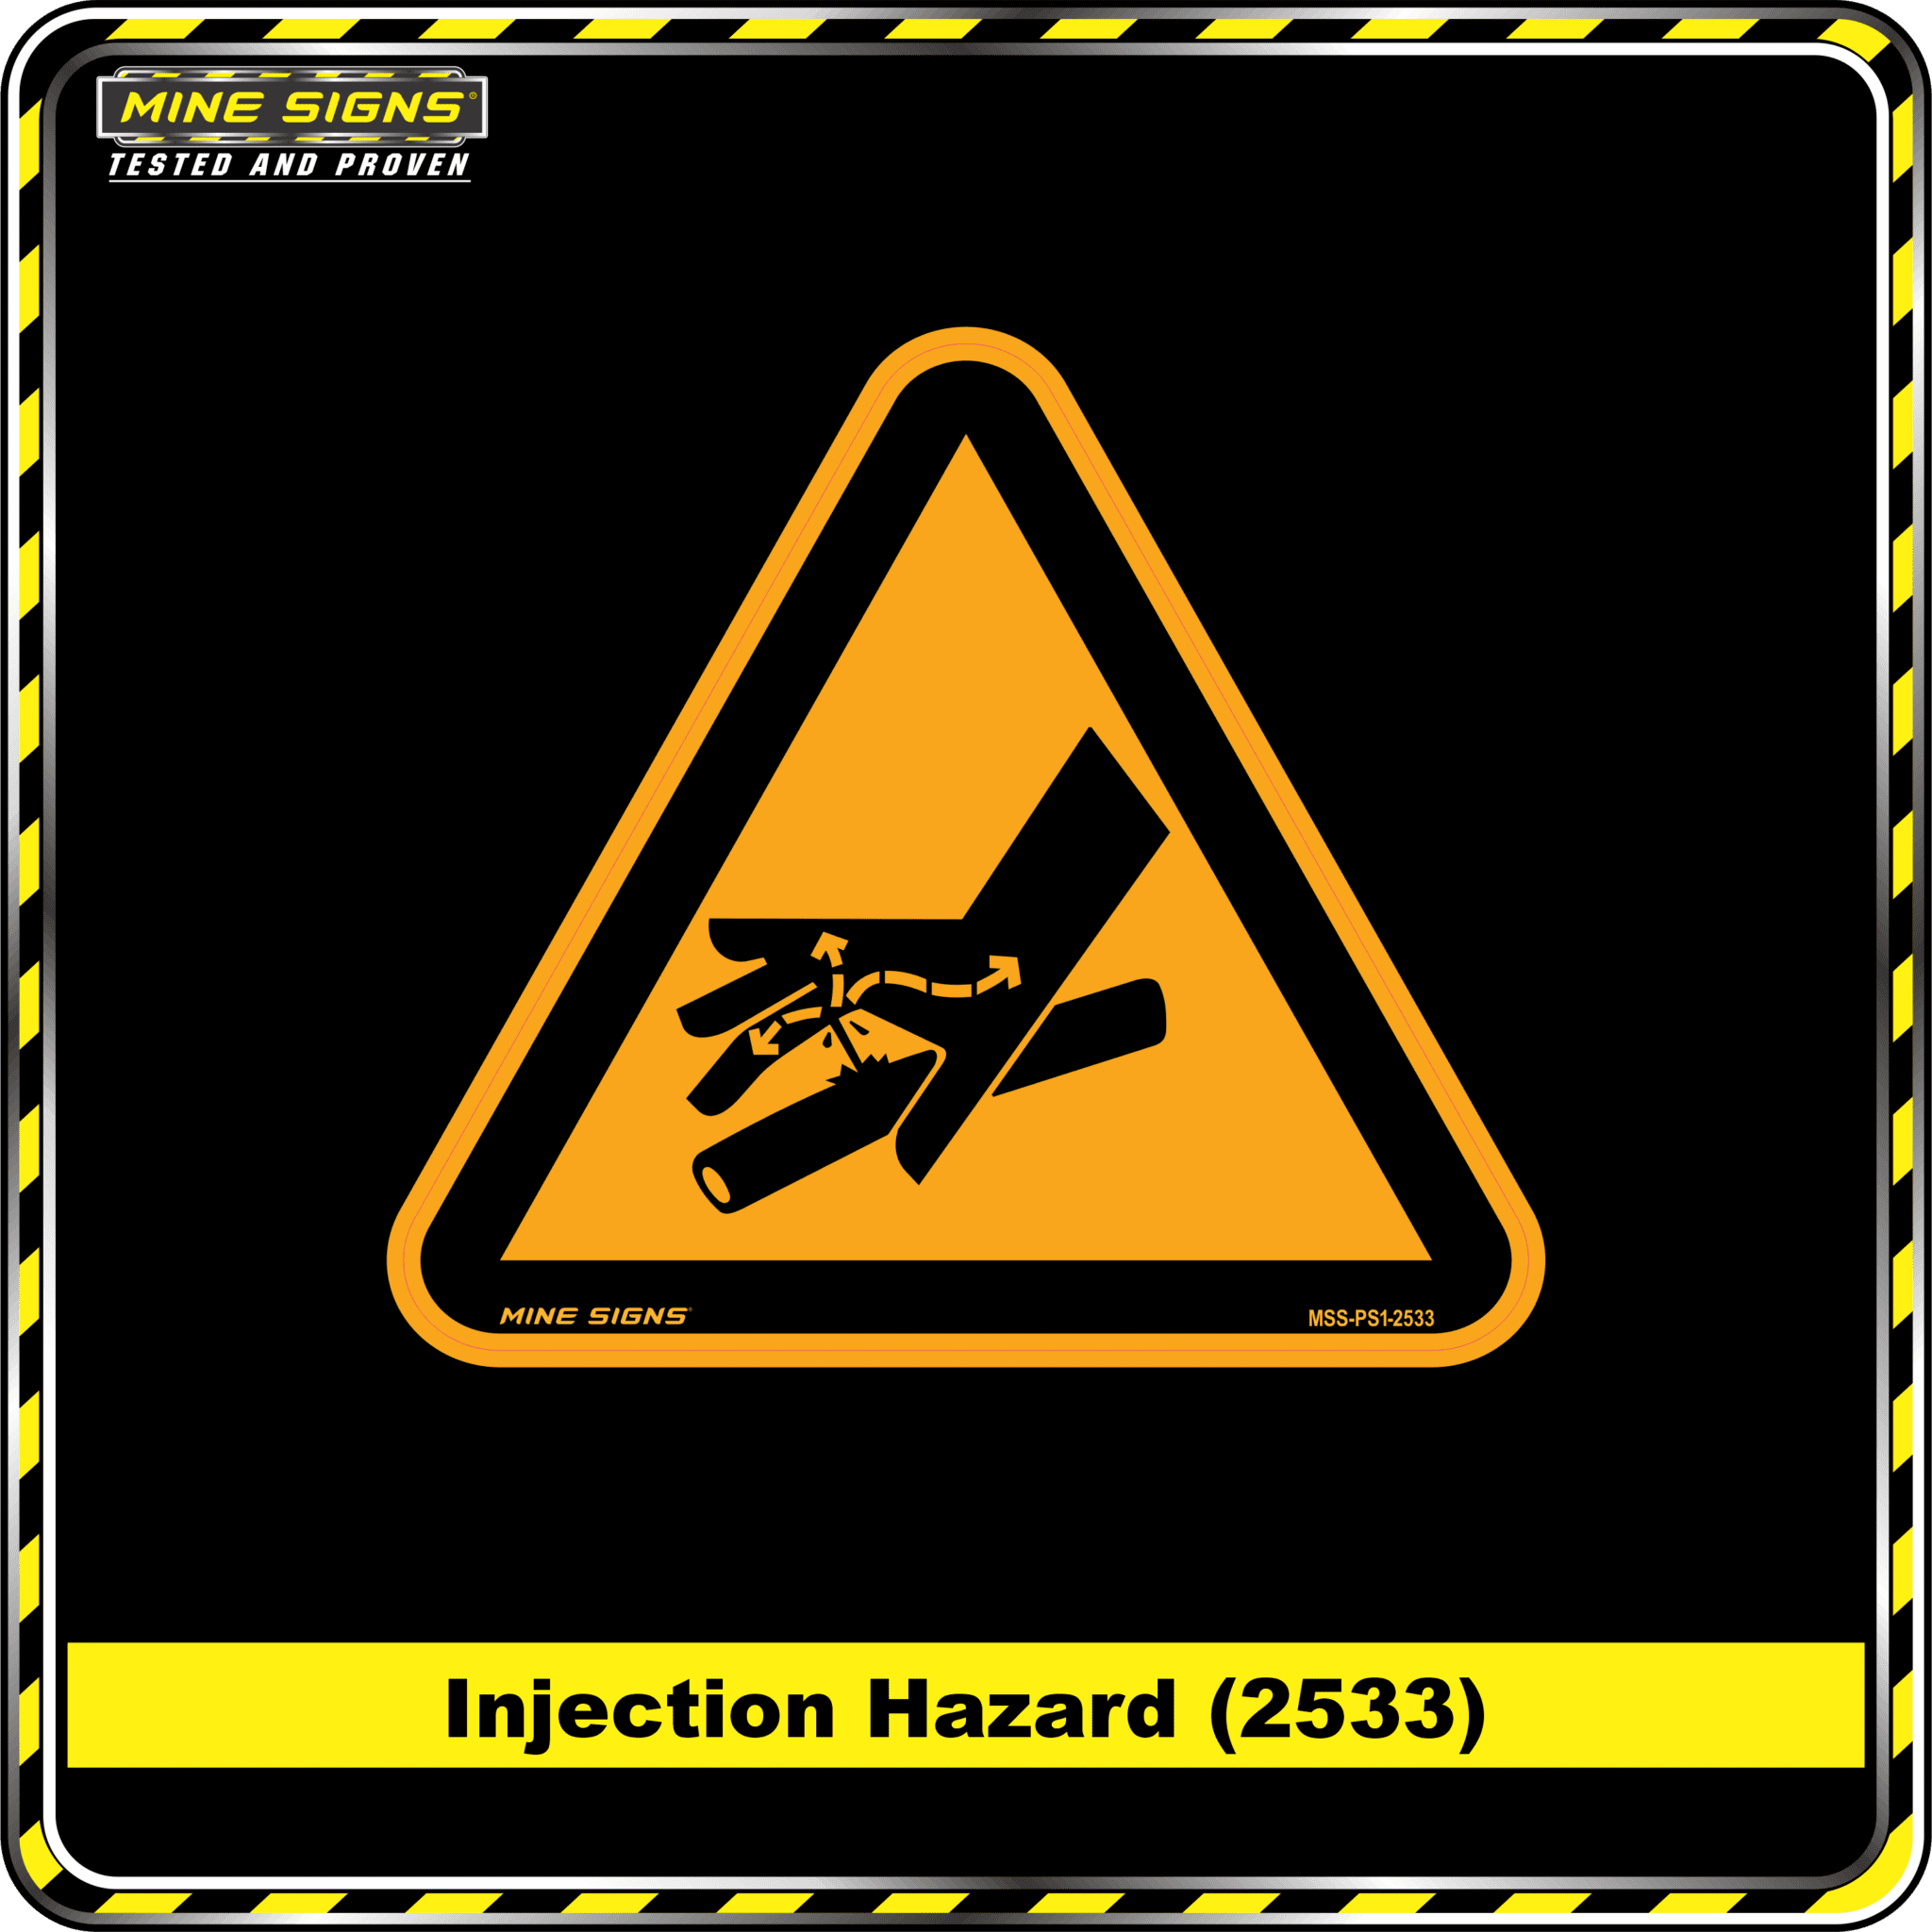 MS - Product Background - Safety Signs - Injection Hazard 2533